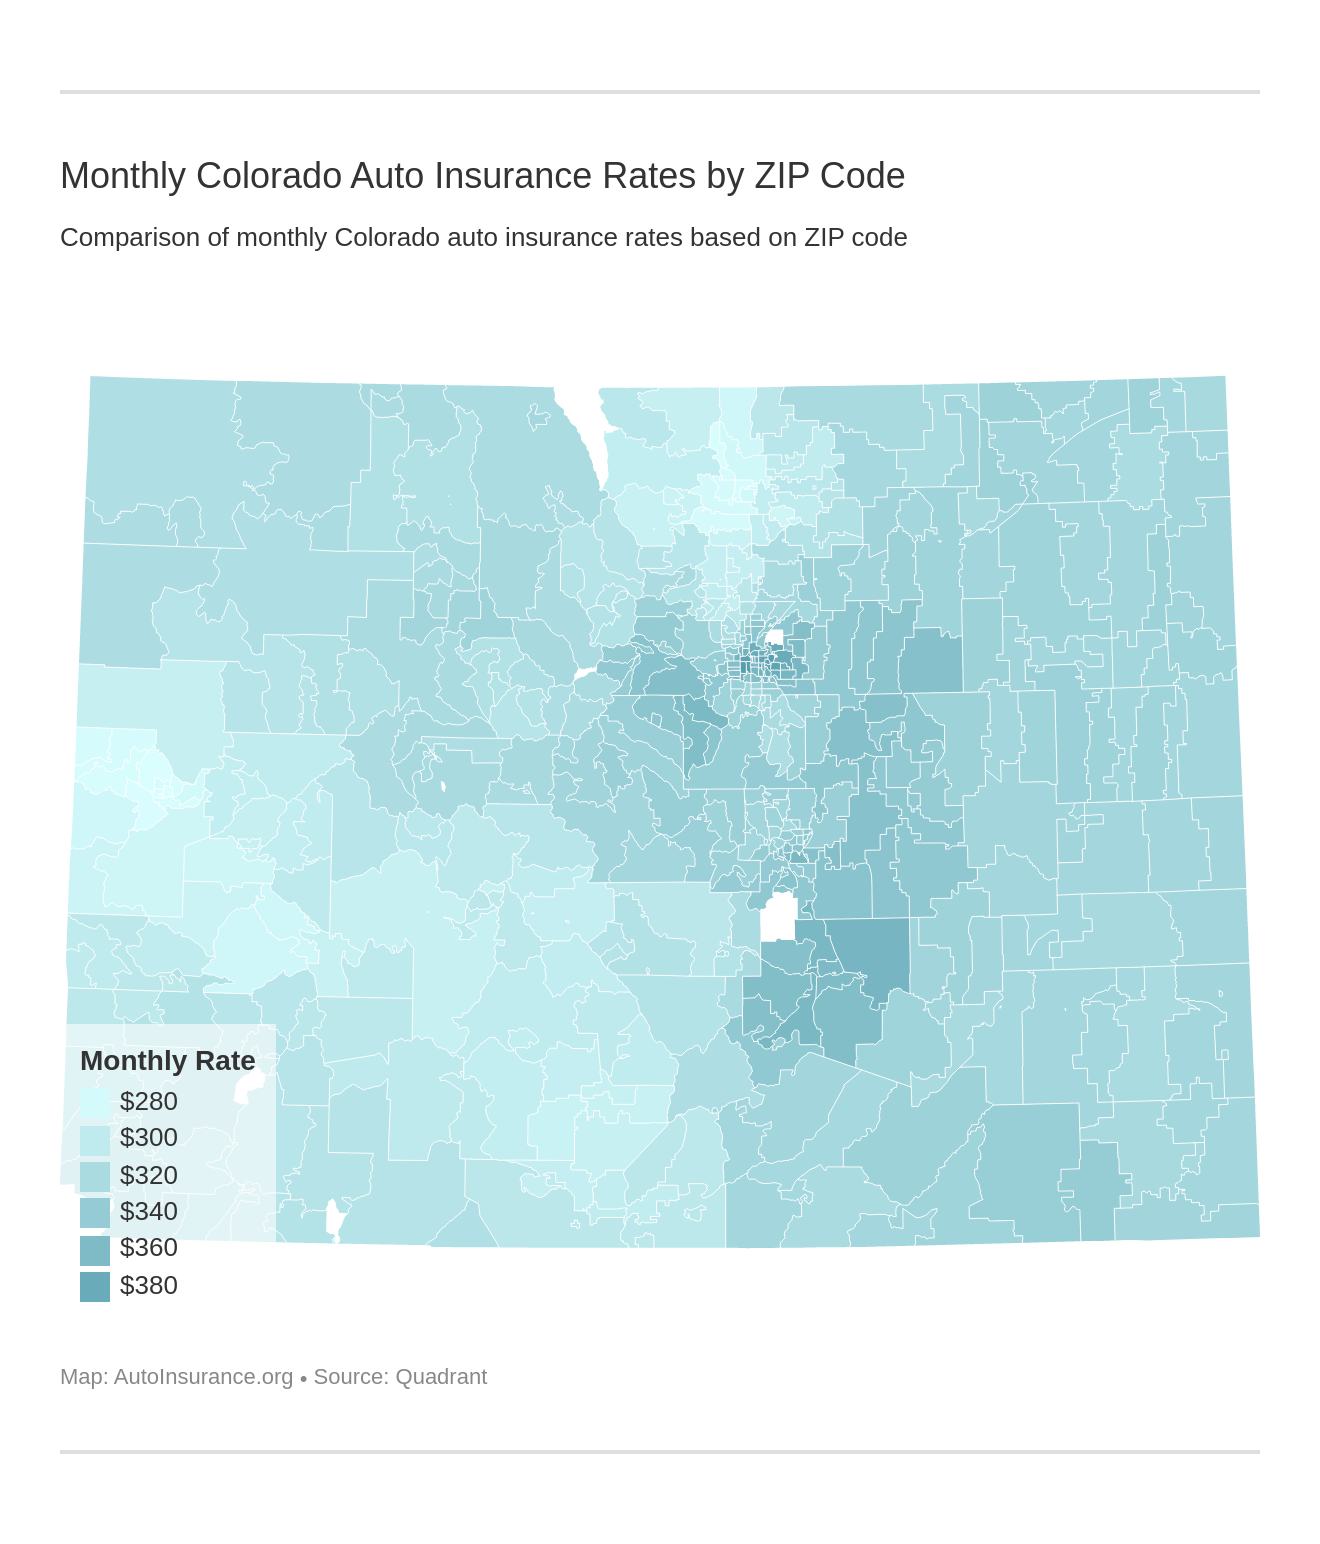 Monthly Colorado Auto Insurance Rates by ZIP Code